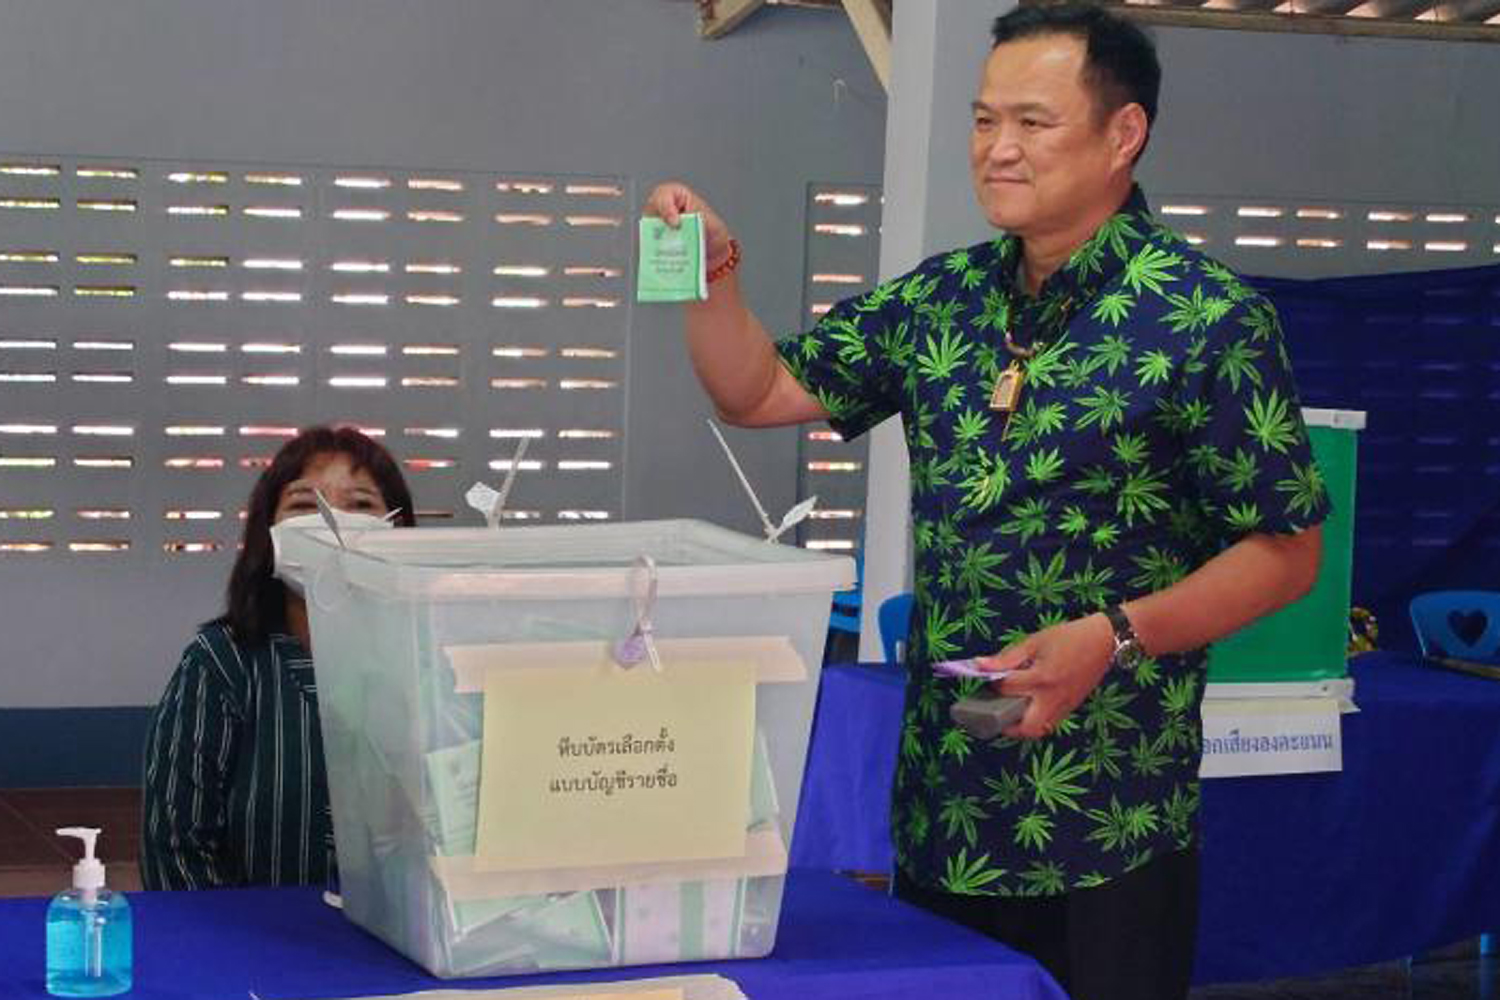 Bhumjaithai Party's prime ministerial candidate and acting Public Health Minister Anutin Charnvirakul casts his ballot at a polling station in Muang district of Buriram province on Sunday. (Photo: Bhumjaithai Party)